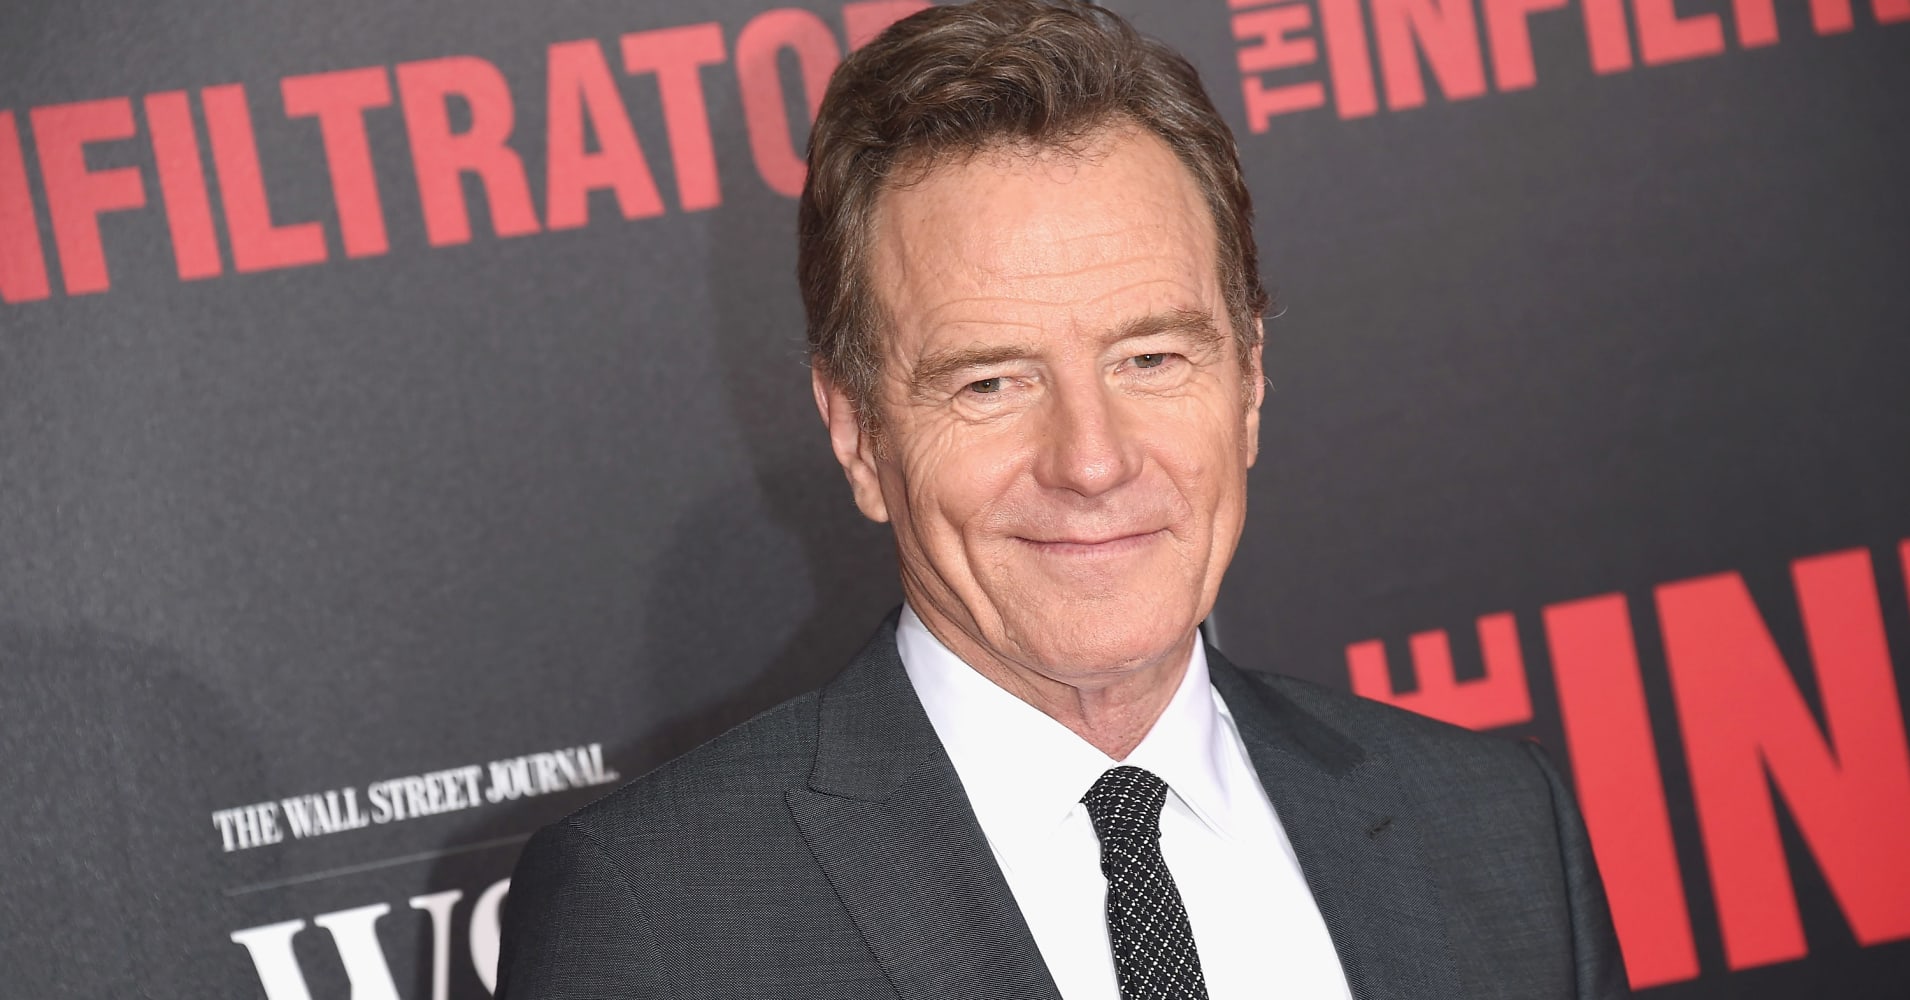 HOW MUCH MONEY DID BRYAN CRANSTON MAKE FROM BREAKING BAD